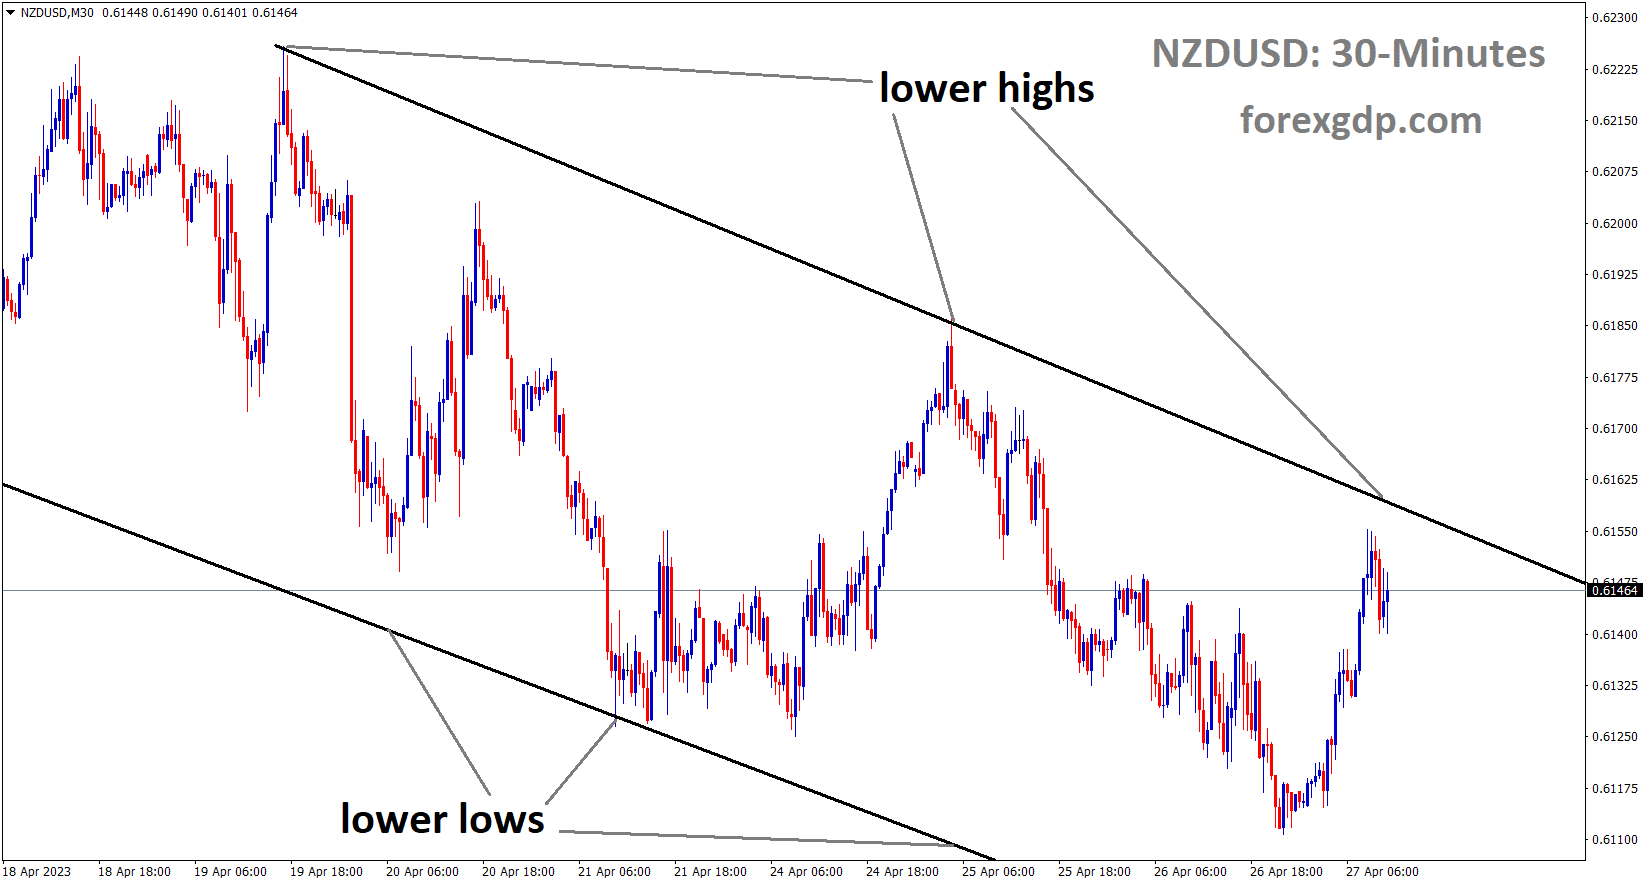 NZDUSD is moving in the Descending channel and the market has reached the lower high area of the channel 2